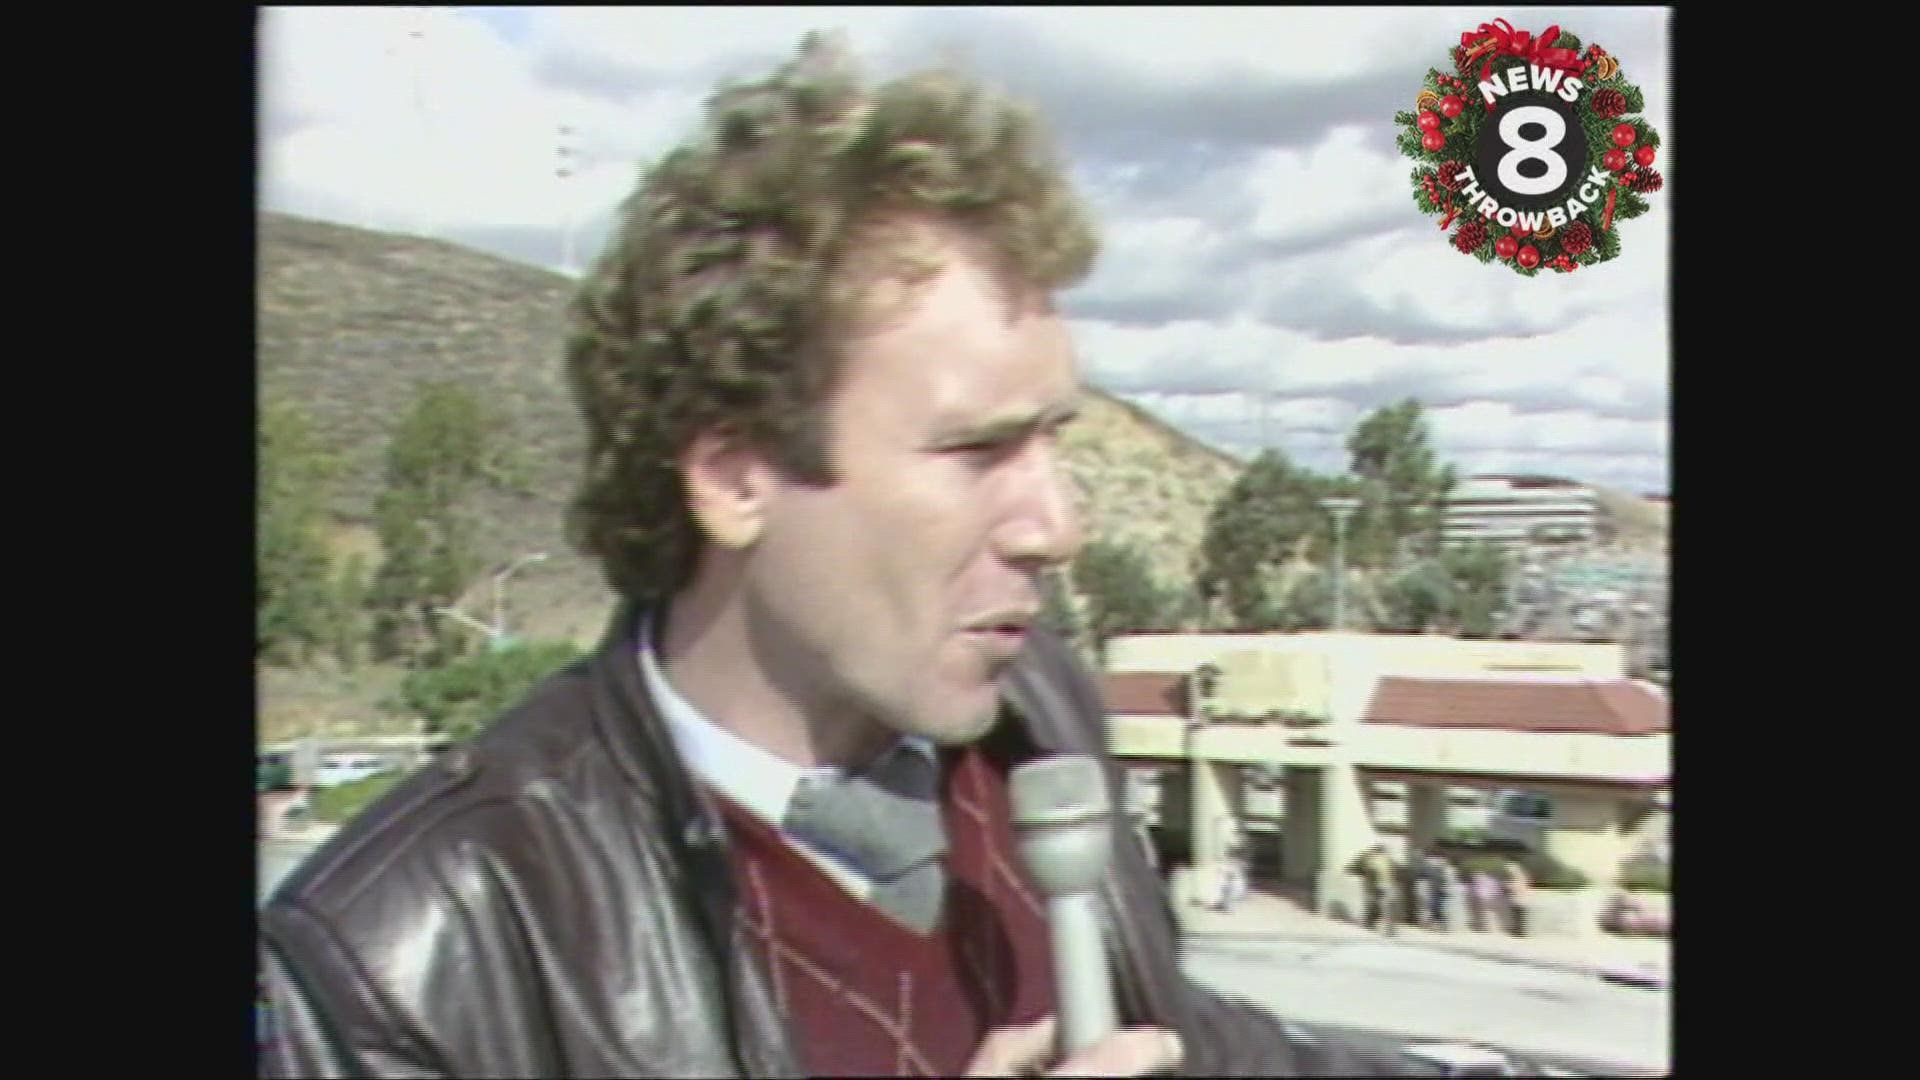 As they always do on Black Friday, crowds flocked to San Diego's Fashion Valley mall in 1983. News 8's Larry Himmel reported on the shopping madness at the mall